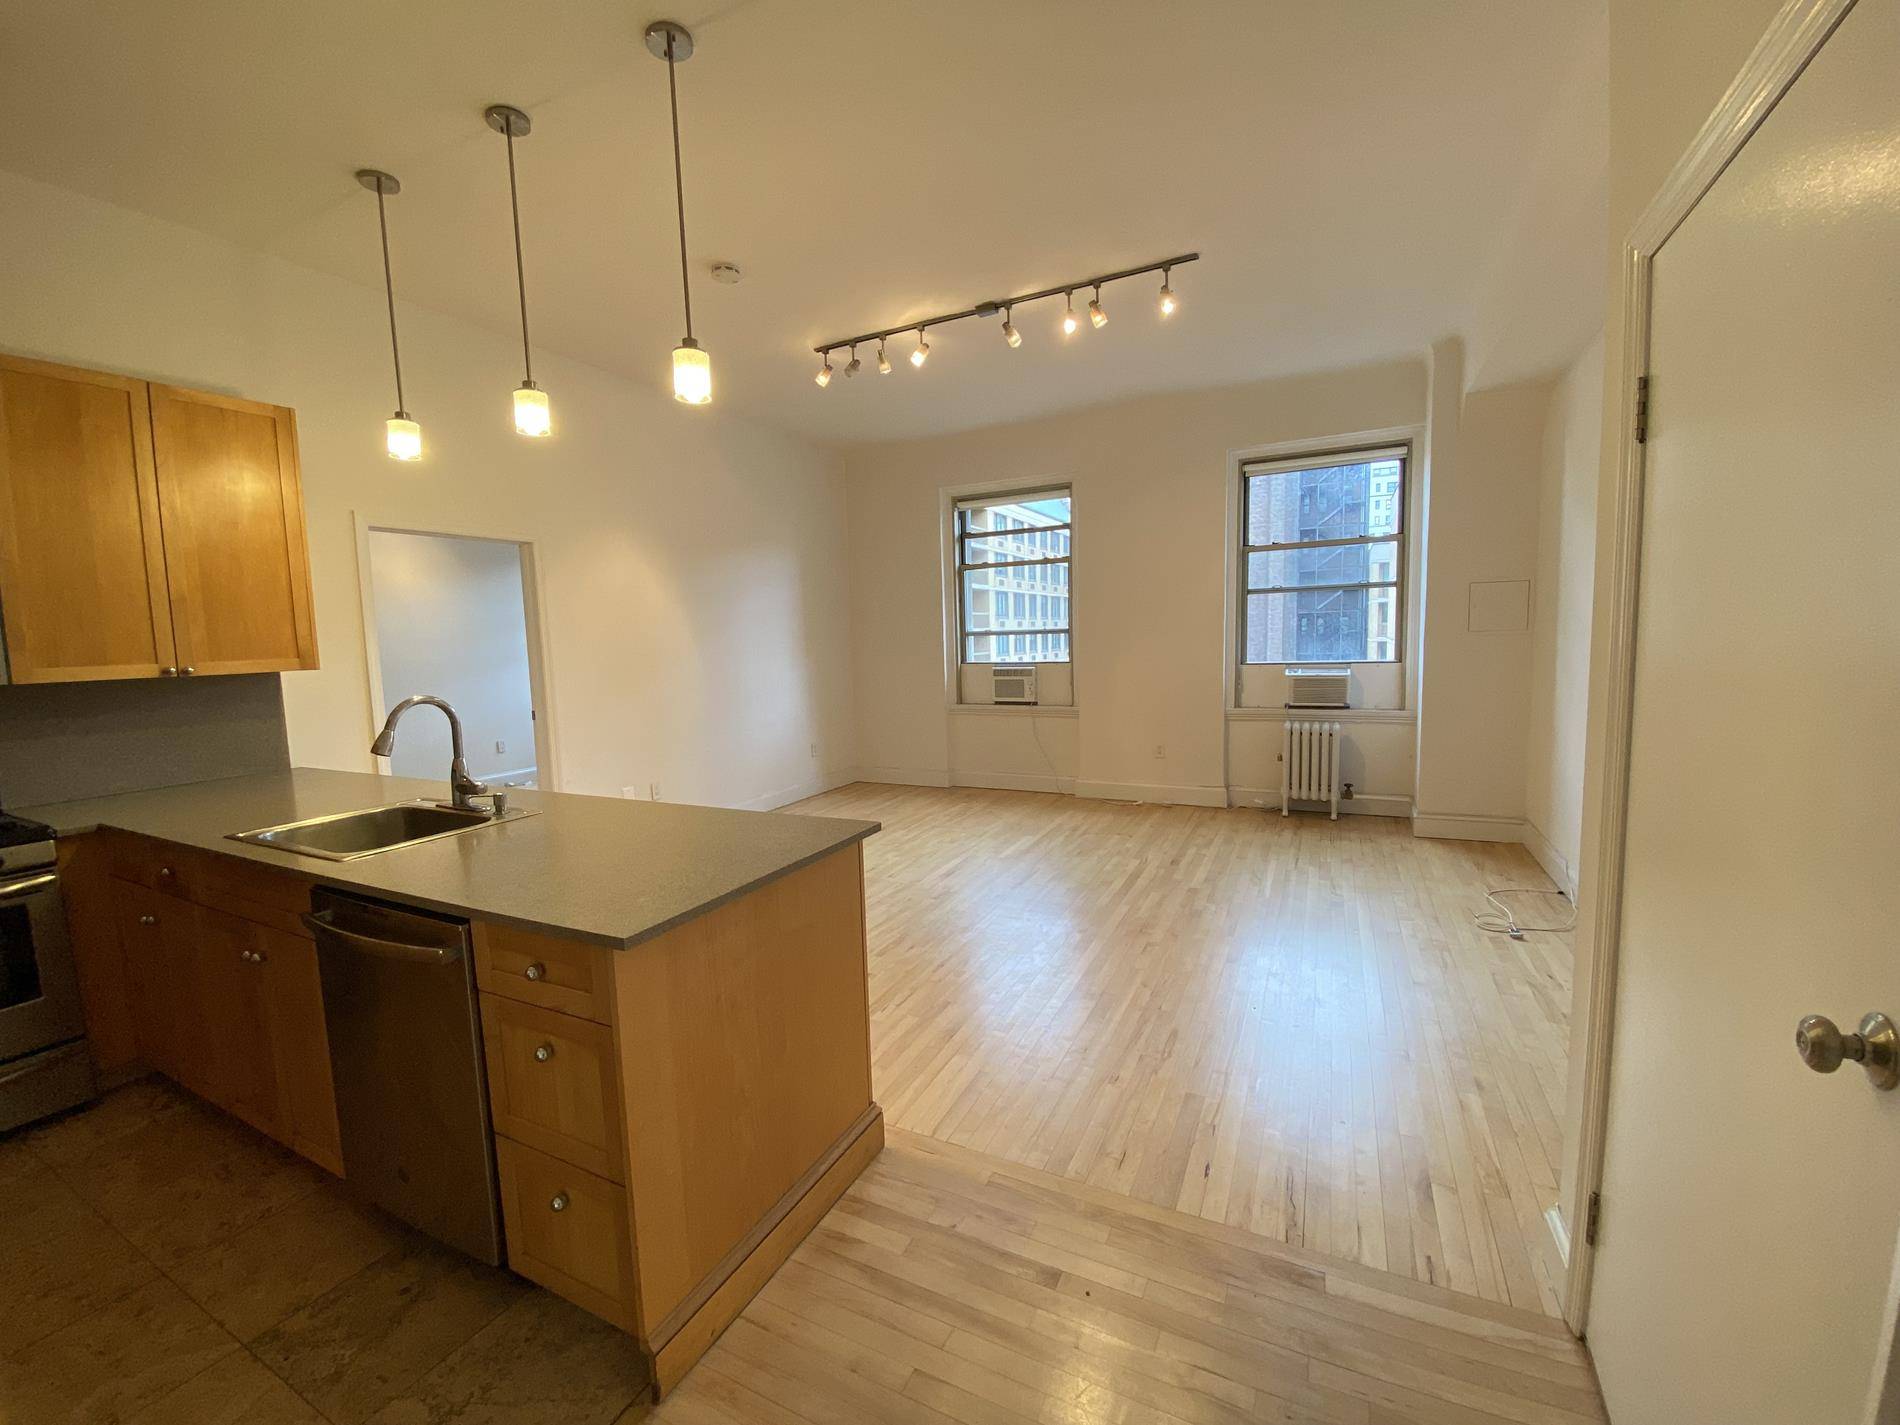 Renovated split two bedroom with two full marble baths, 11' ceilings and washer dryer in unit.